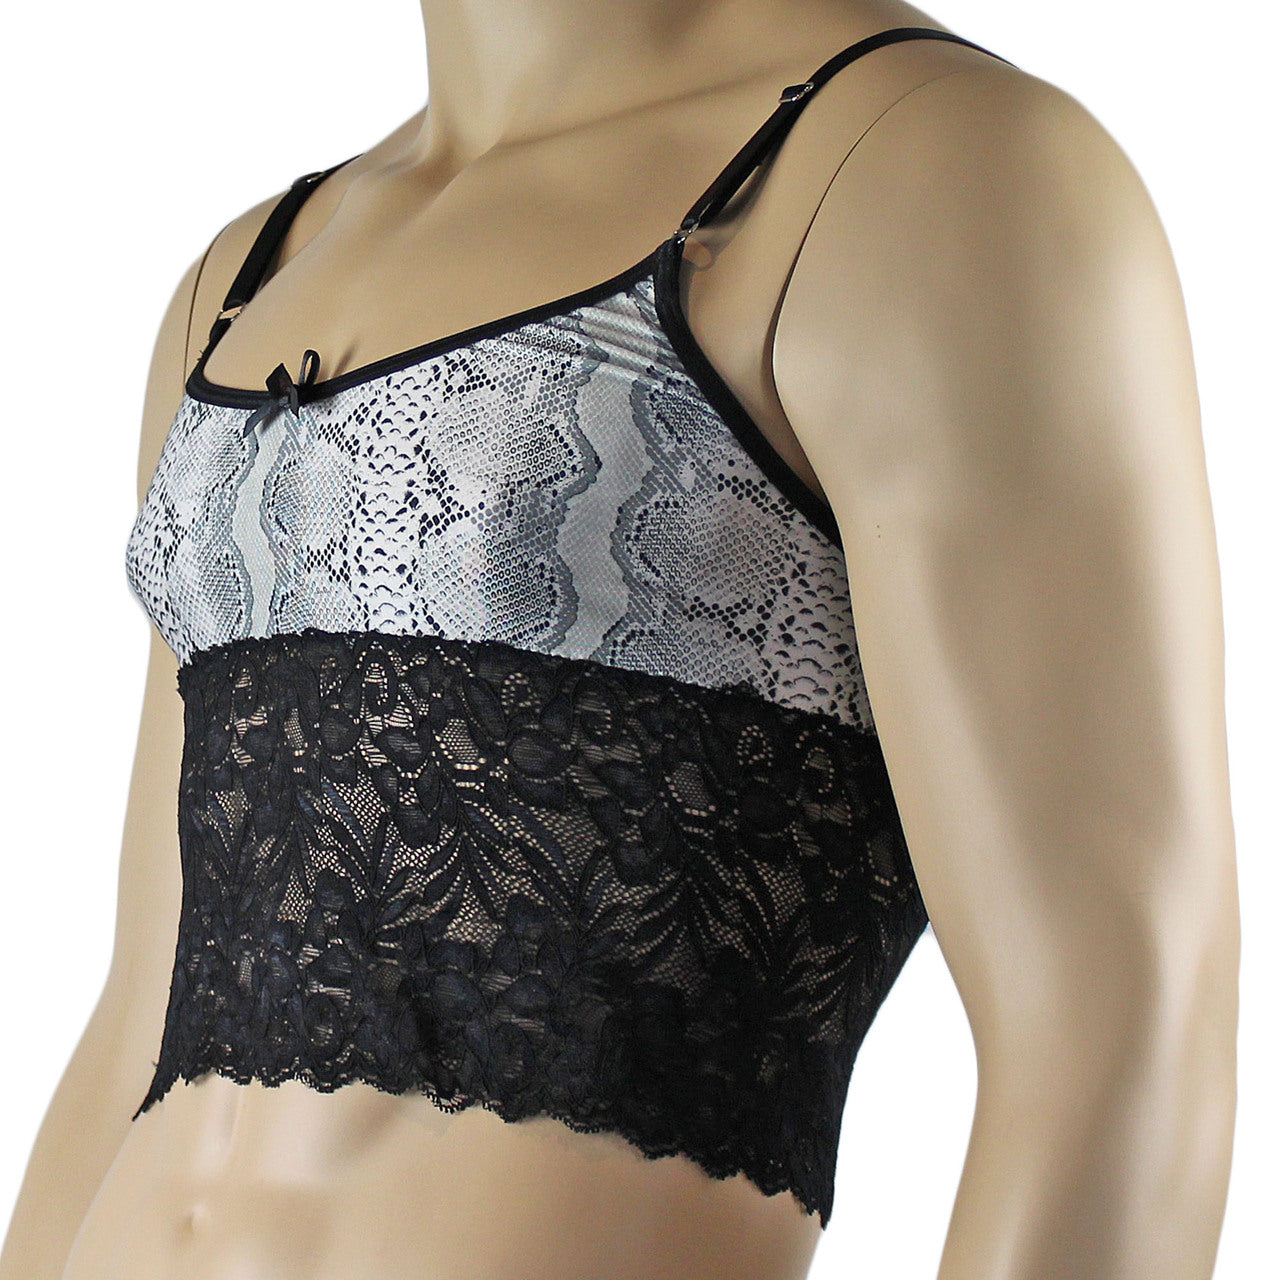 Mens Bra Top Camisole in Grey Snake Print & Black Lace